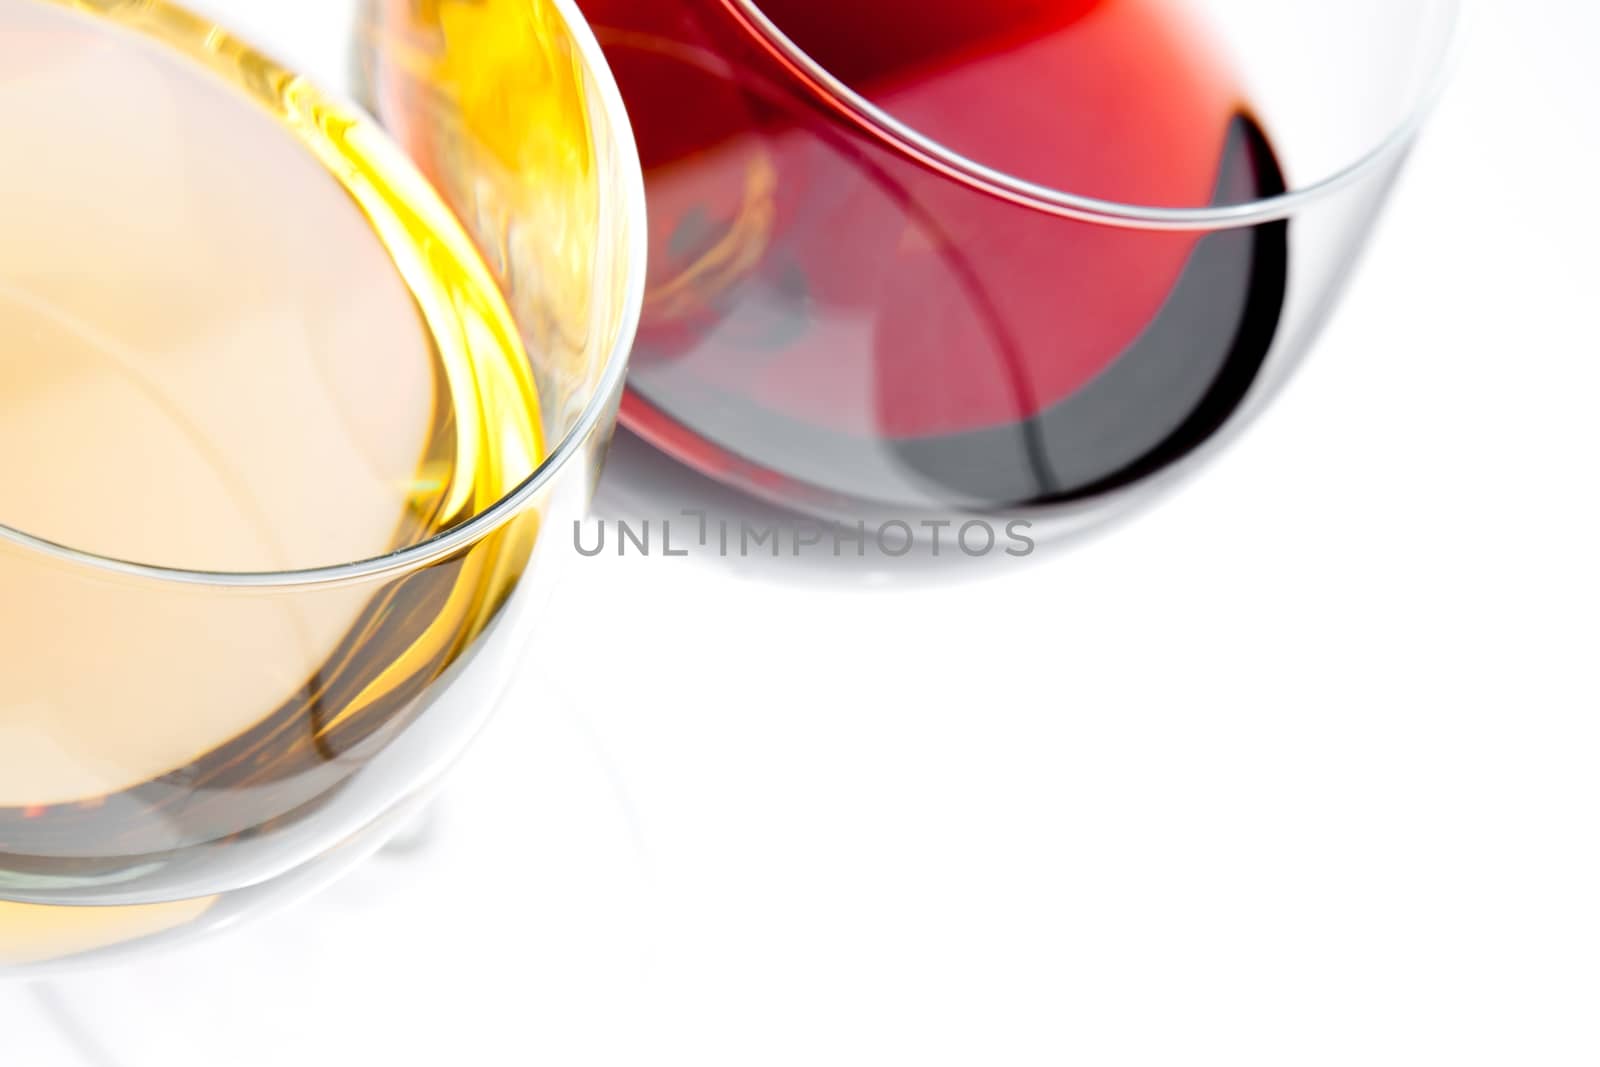 top of view of red and white wine glasses with space for text by donfiore